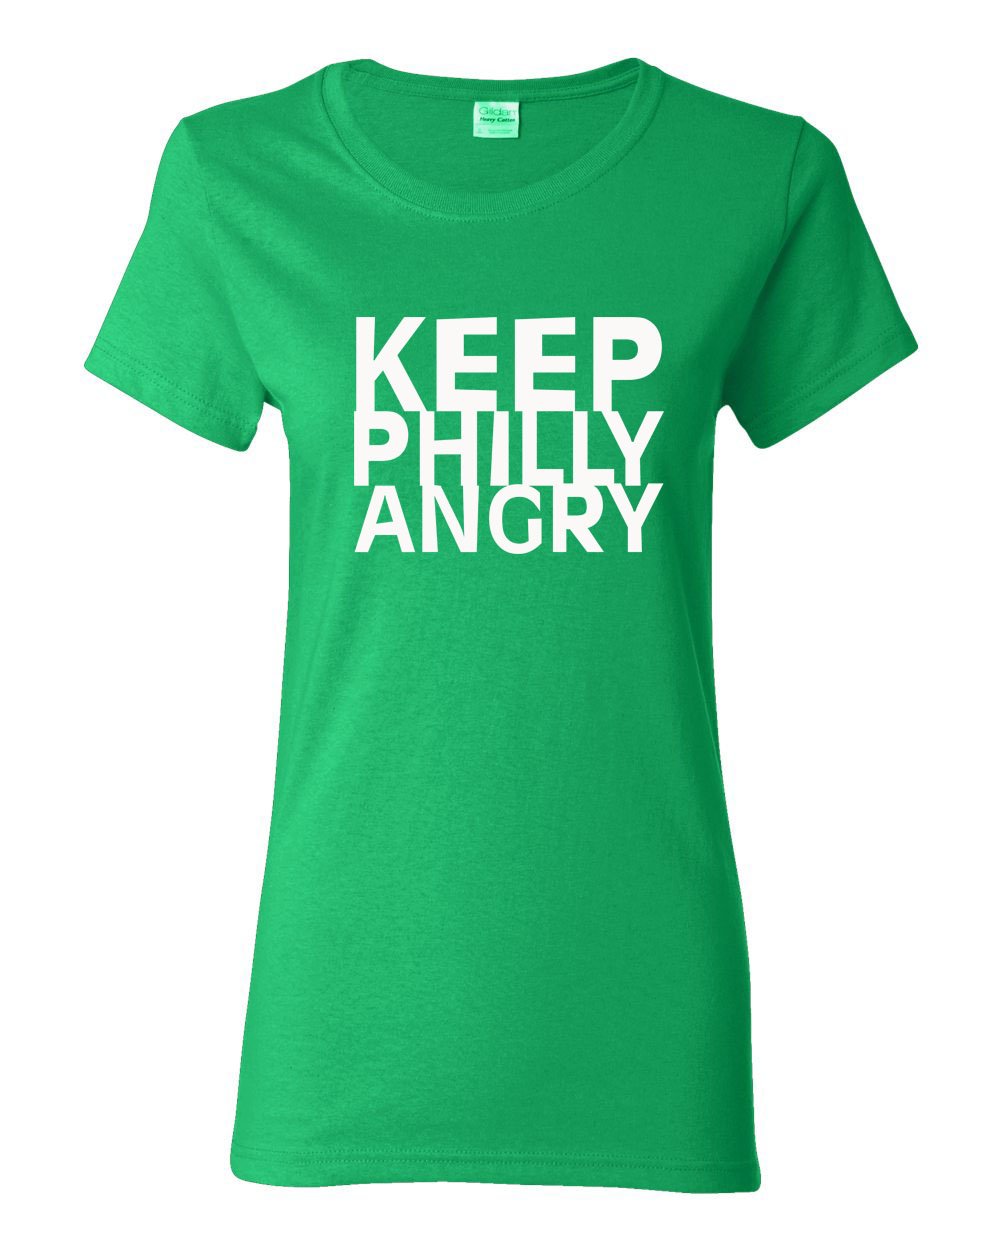 Keep Philly Angry White Ink LADIES Missy-Fit T-Shirt